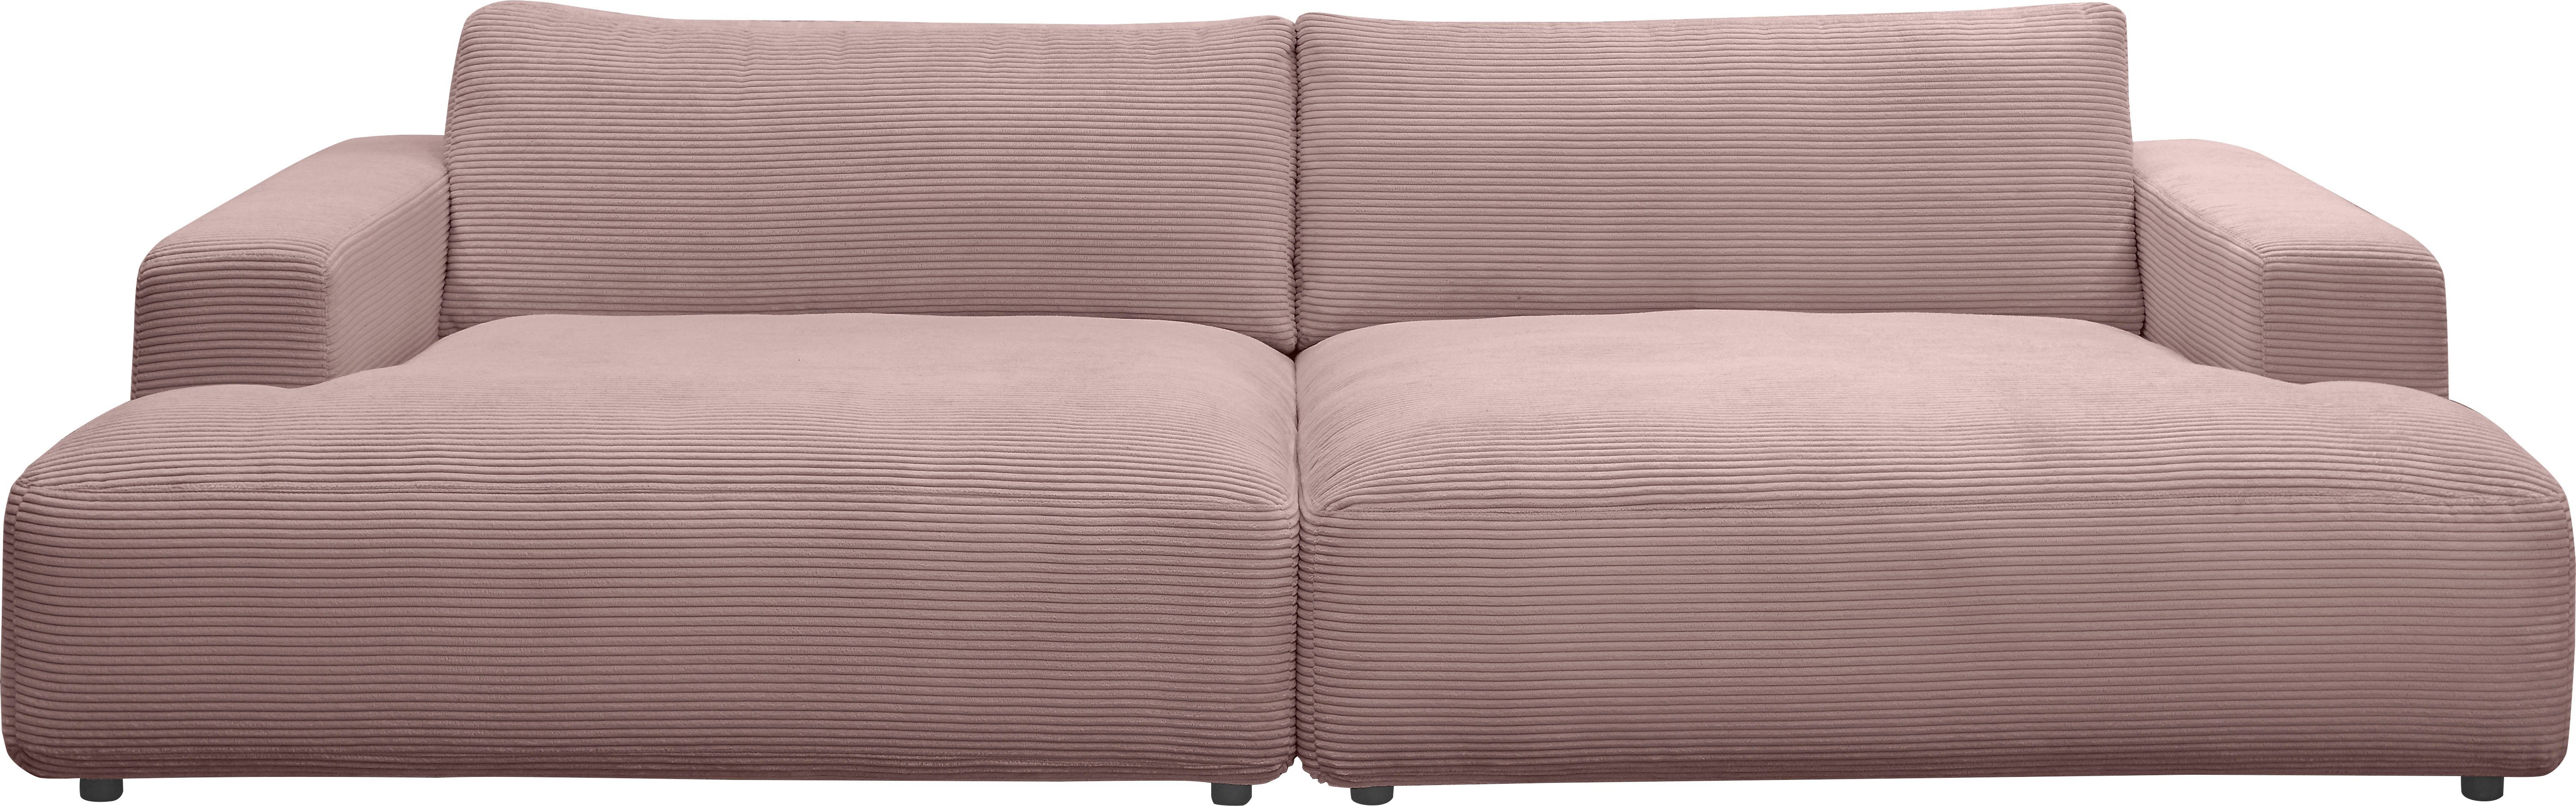 GALLERY M branded by Musterring Loungesofa Lucia, Cord-Bezug, Breite 292 cm rosa